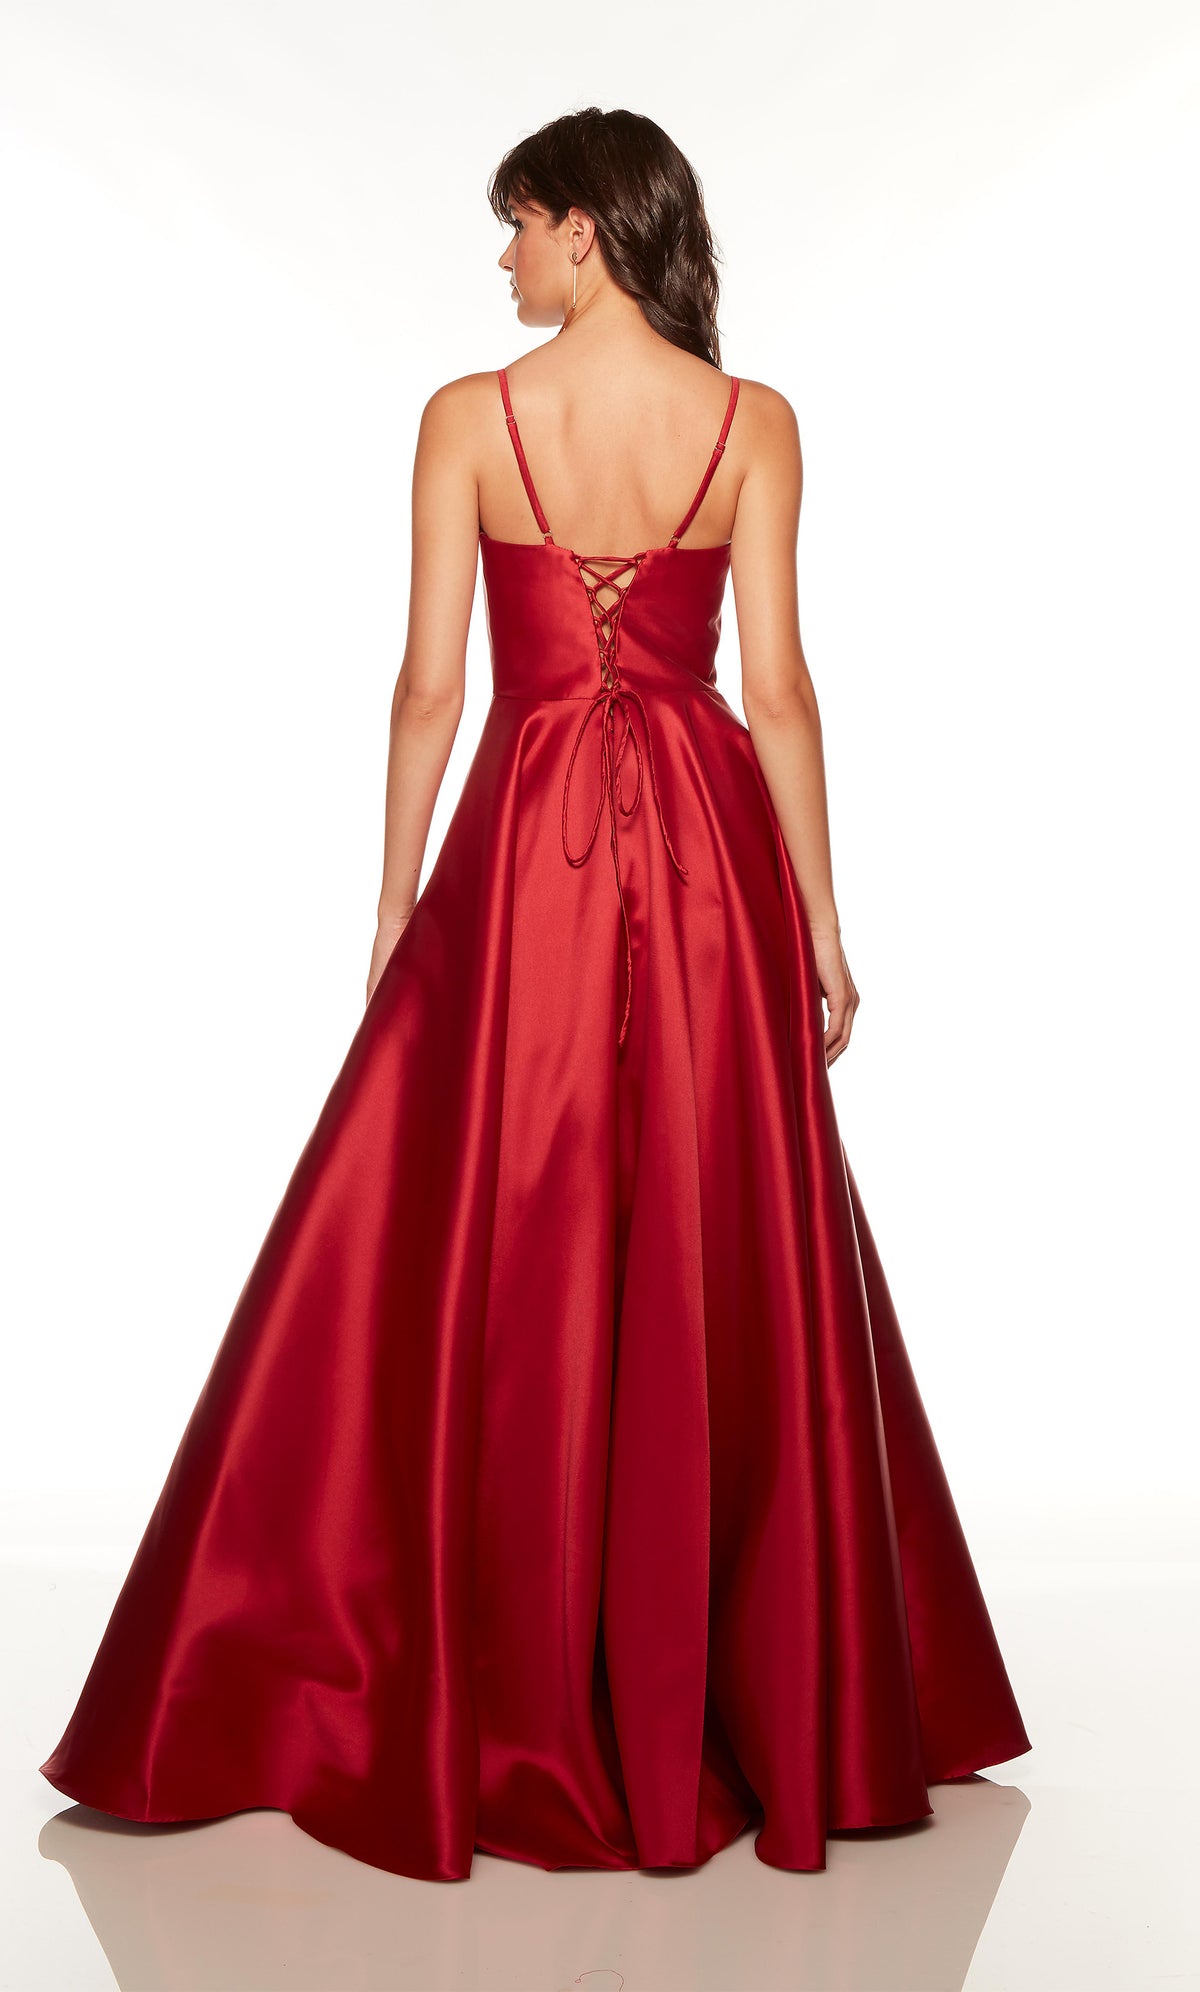 Wine red ballgown with a scoop neckline and pockets.